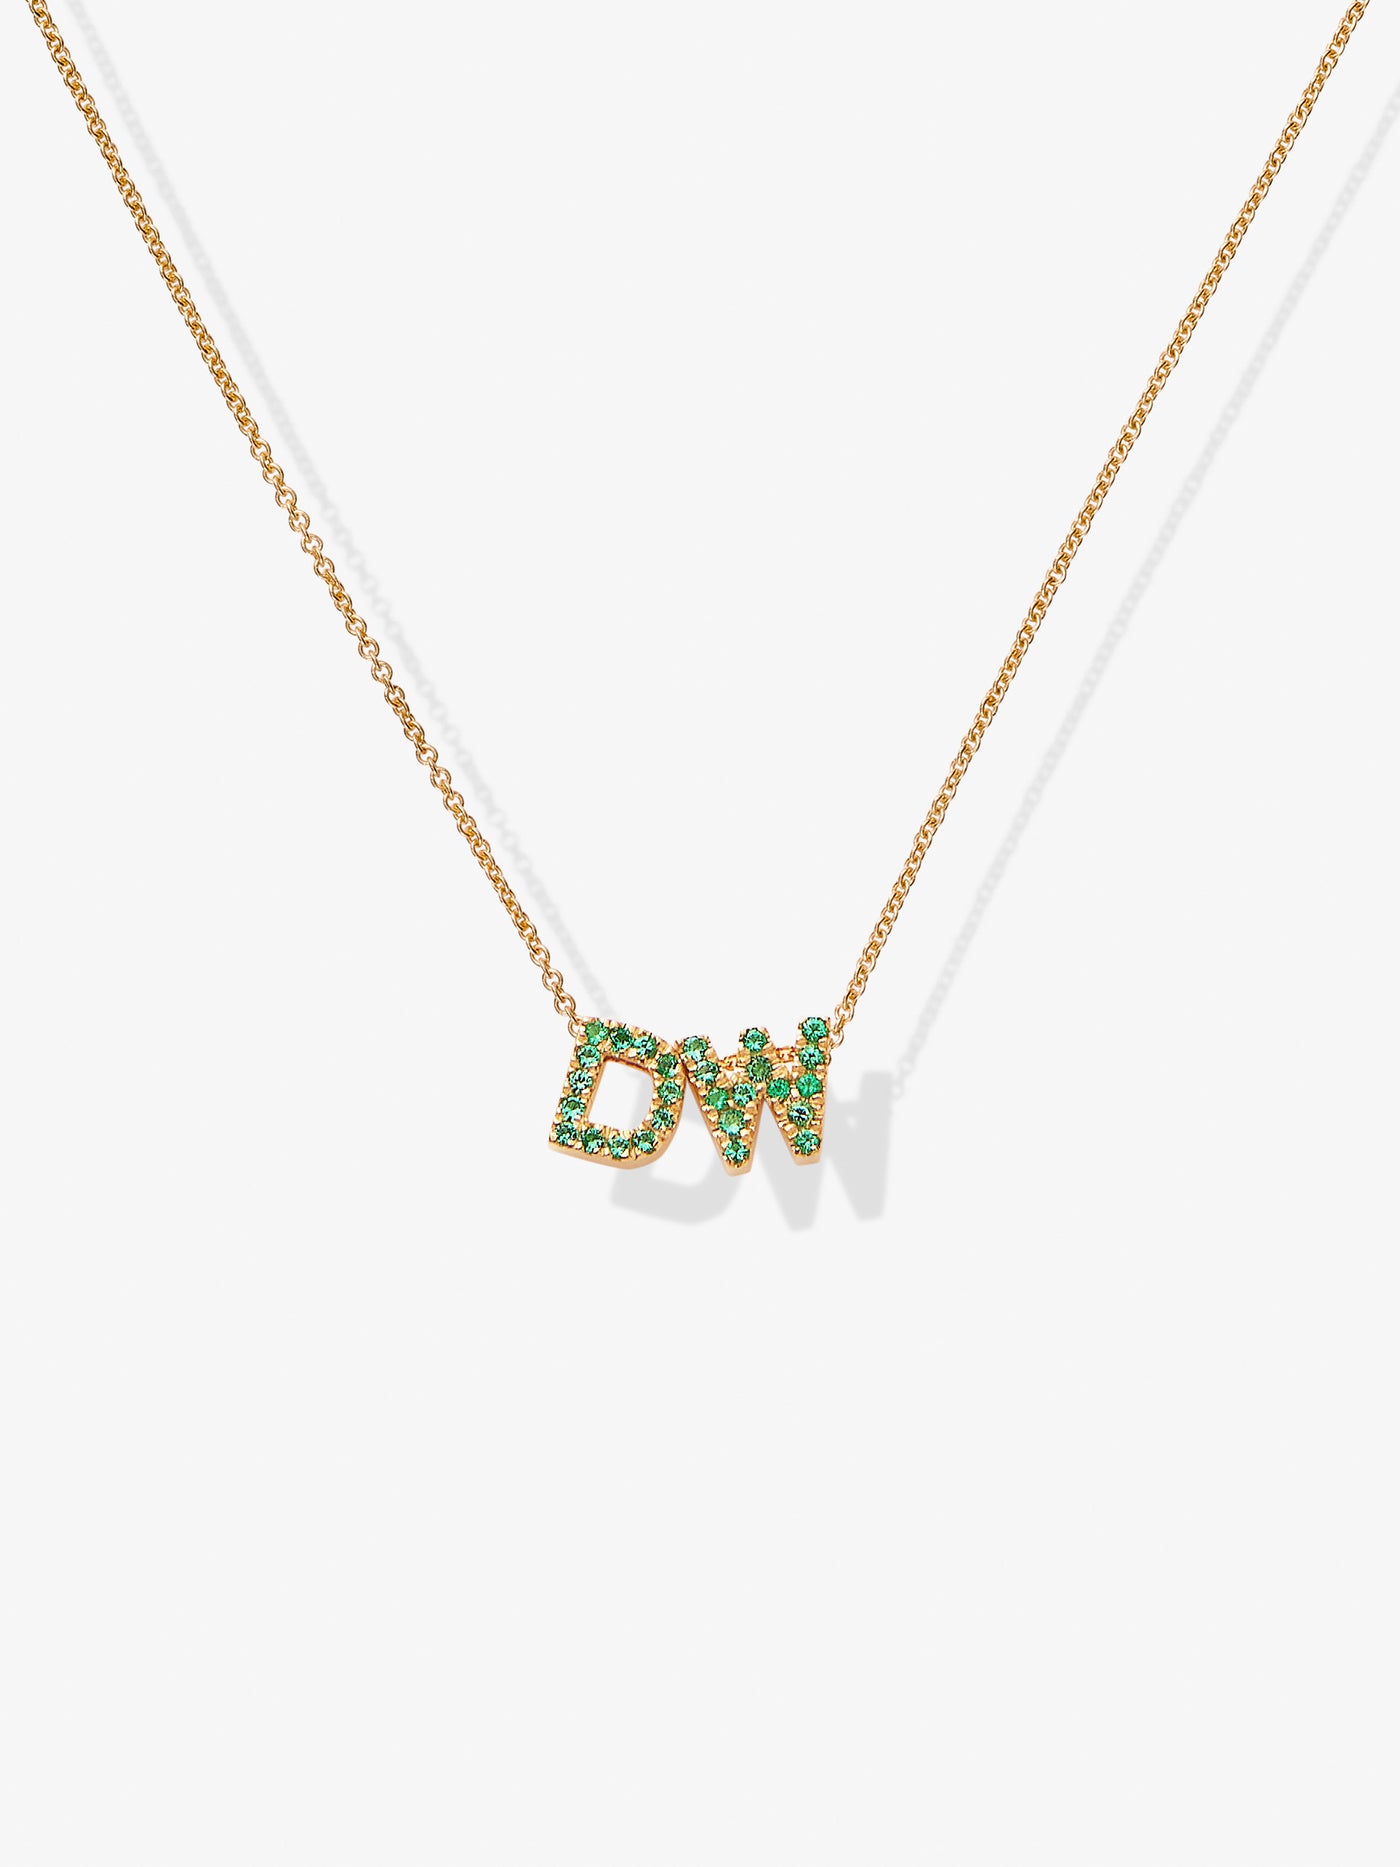 Two Letters Necklace in Tsavorite and 18k Gold